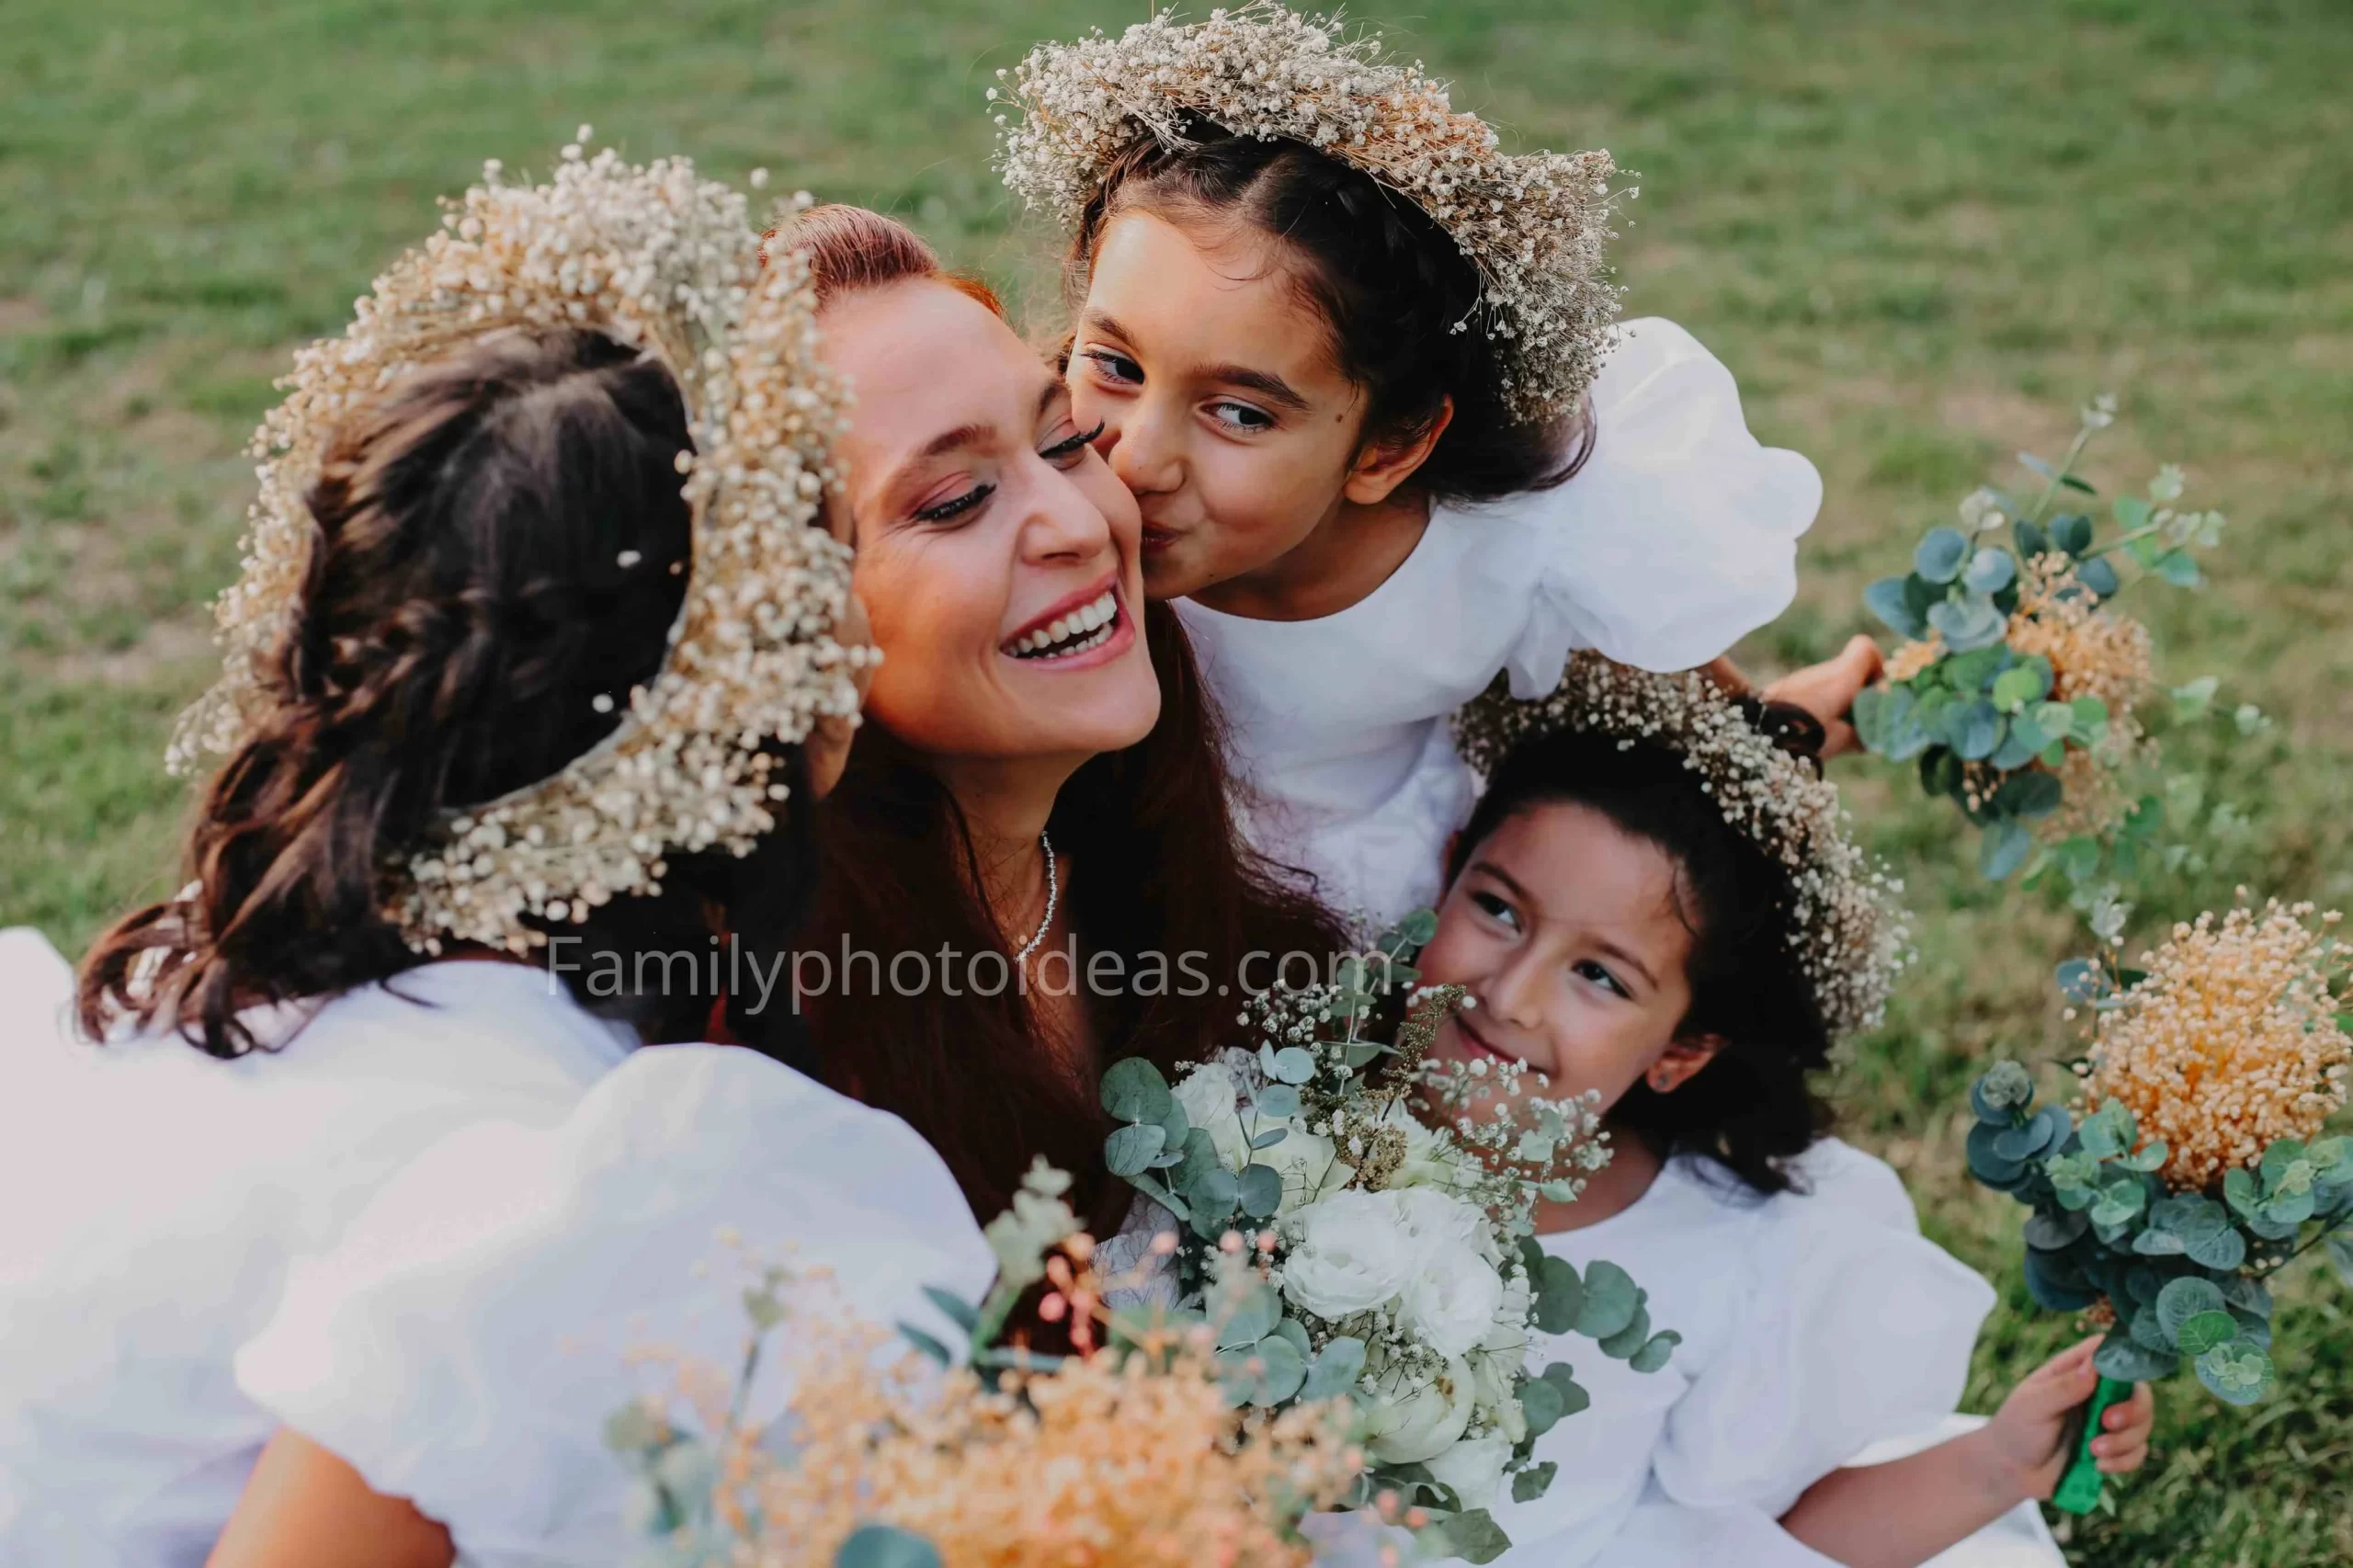 Family Photography tips and ideas